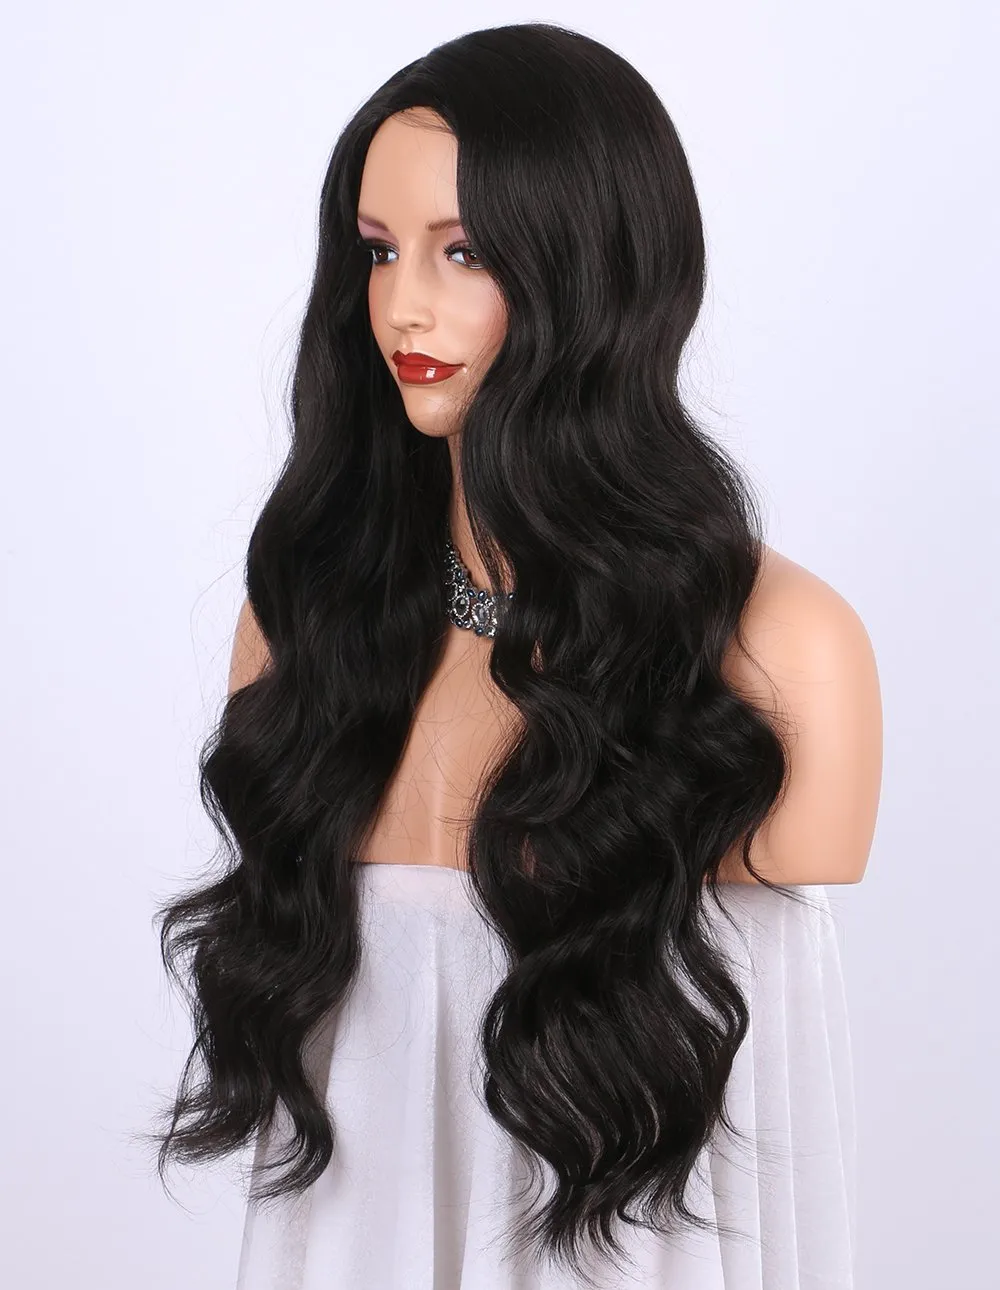 Synthetic Wigs for women - Natural Looking Long Wavy Right Side Parting Heat Resistant Replacement Wig 24 inches